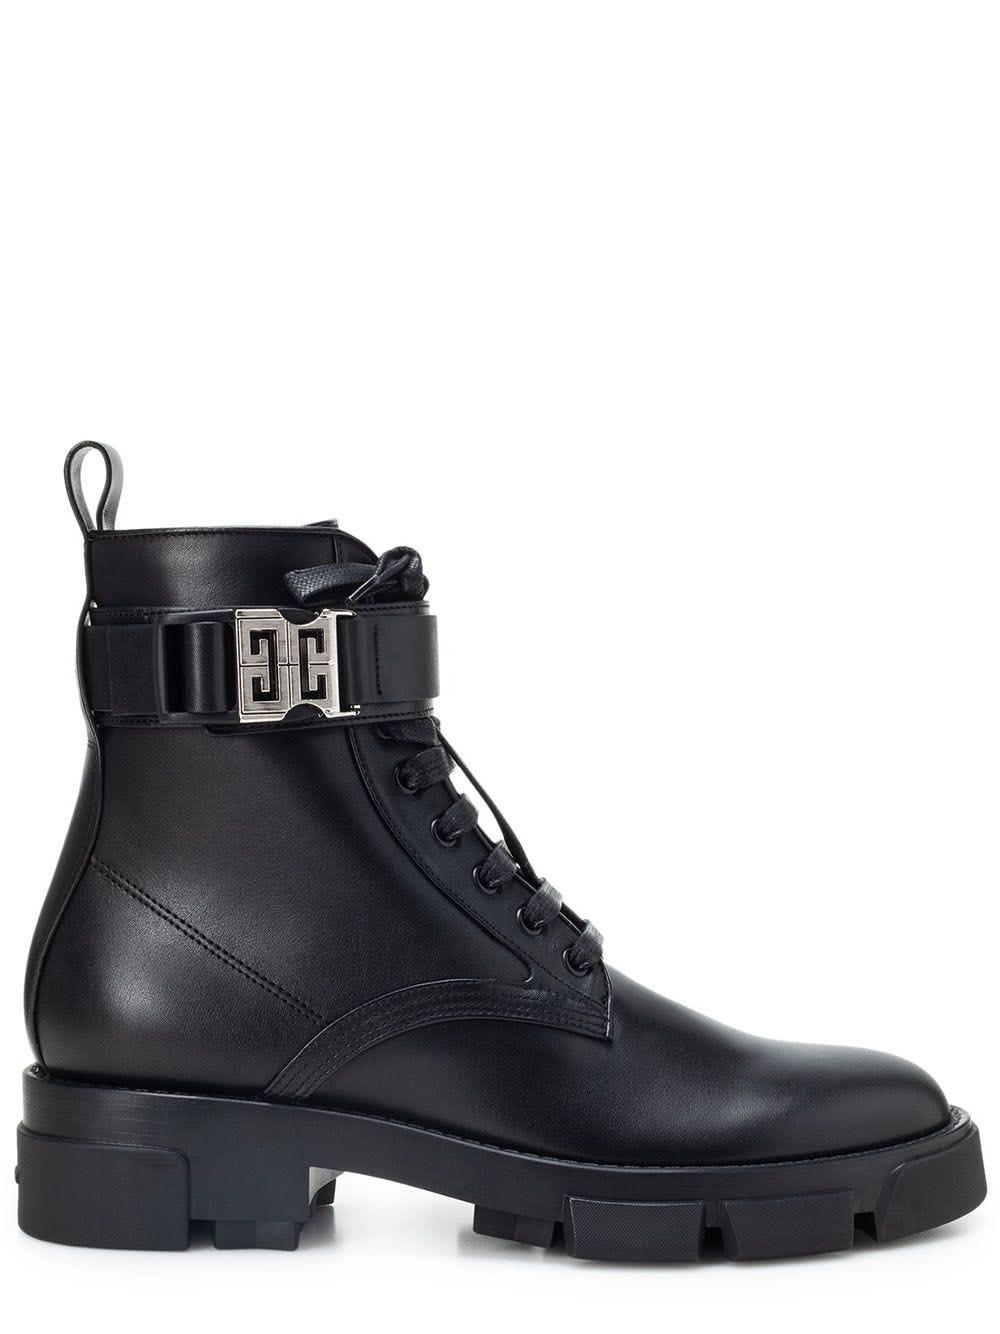 Givenchy Terra Leather Ankle Boots With Buckle 4g in Black | Lyst